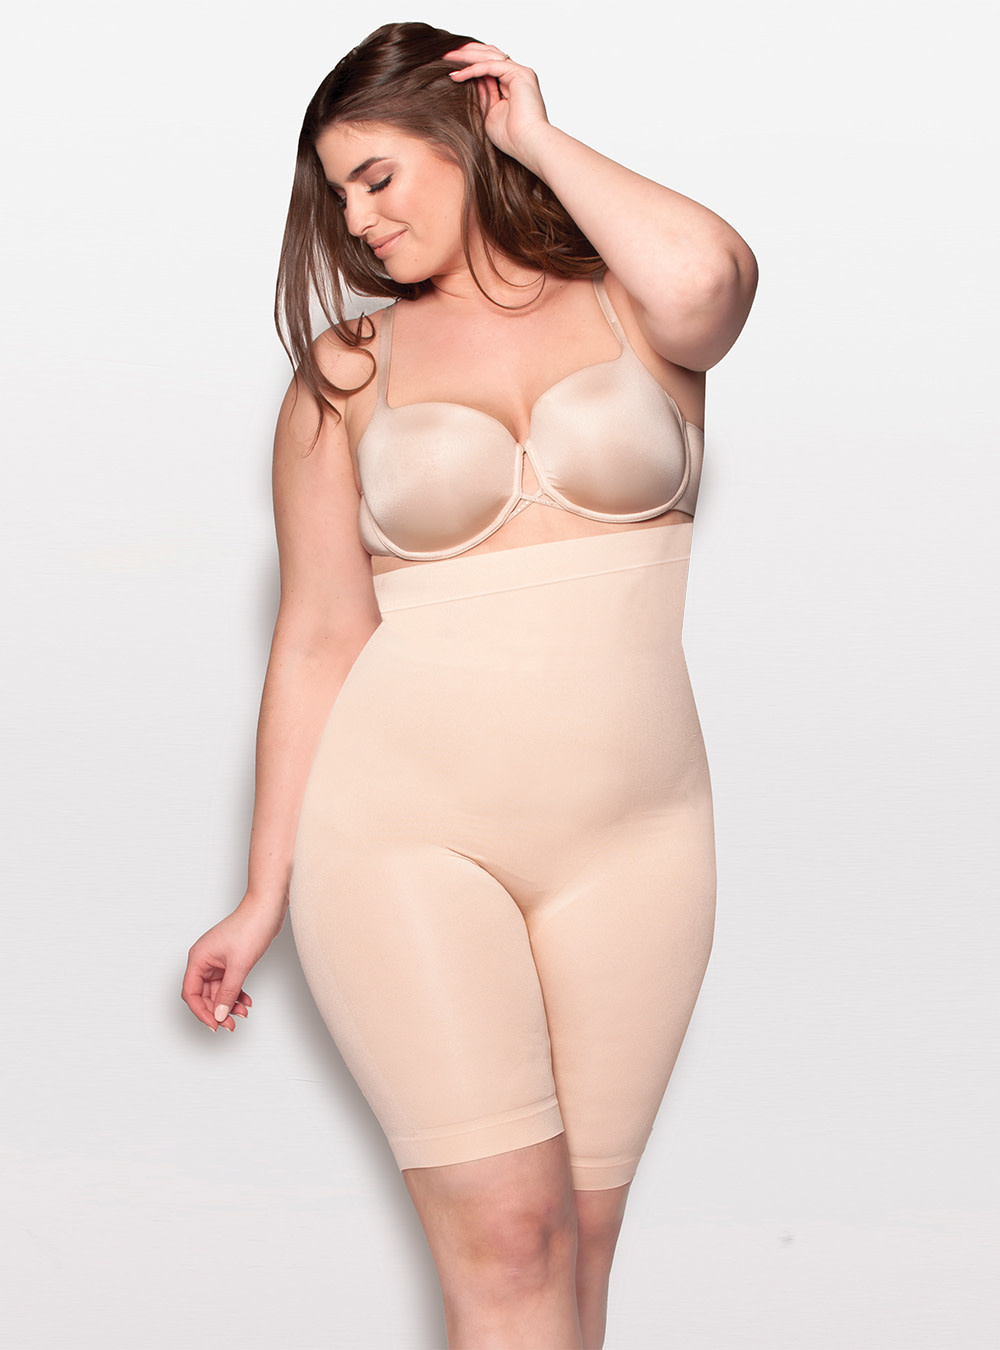 Body Hush BH1607 Sculptor All In One High Waisted Bodyshaper - Nude -  Allure Intimate Apparel